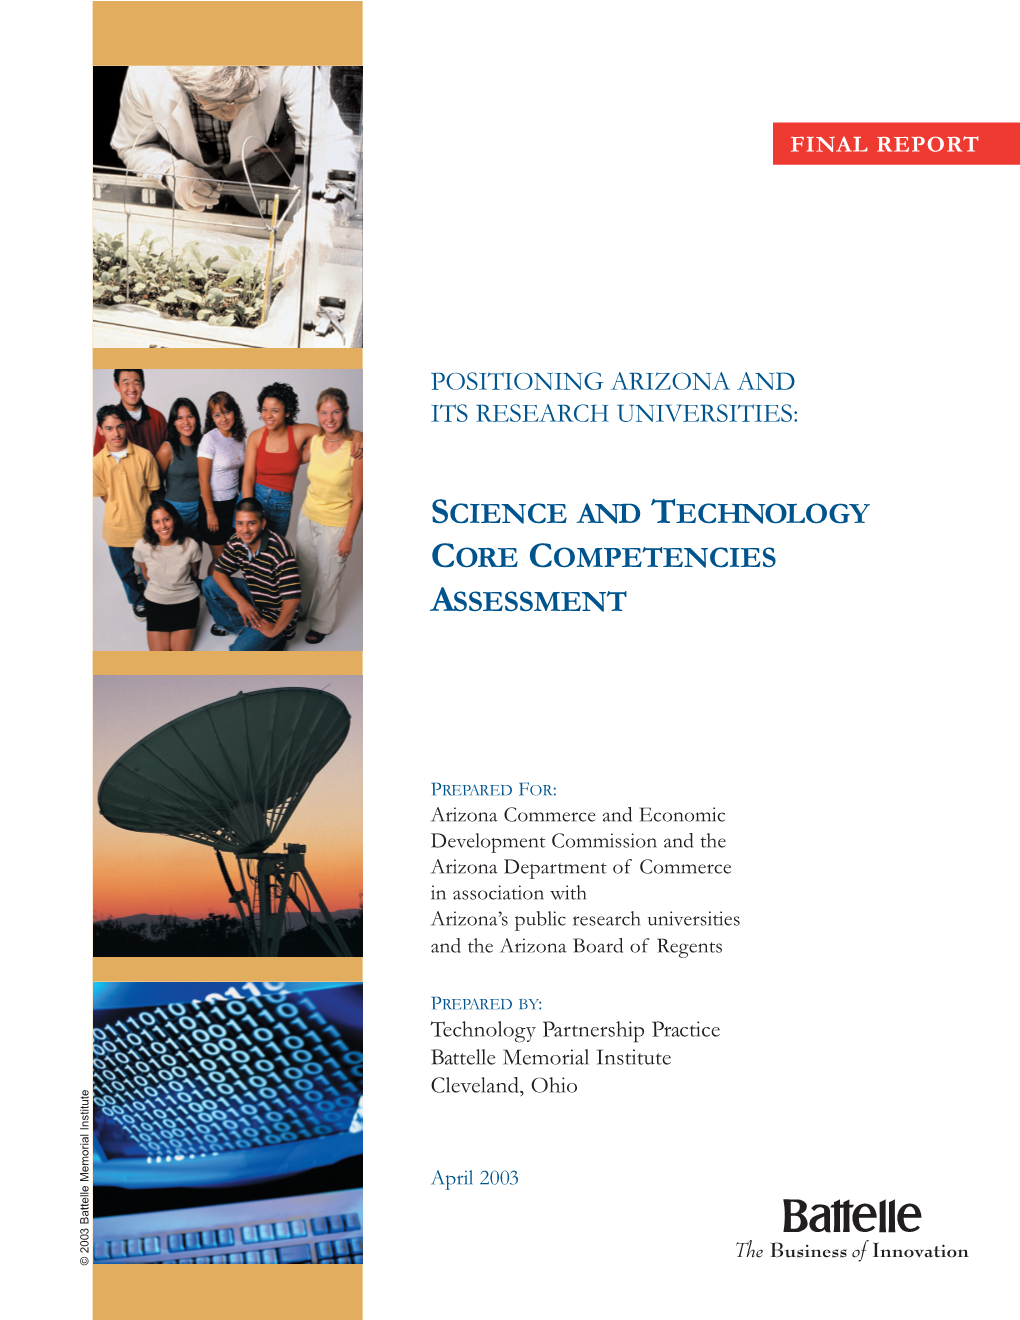 Science and Technology Core Competencies Assessment